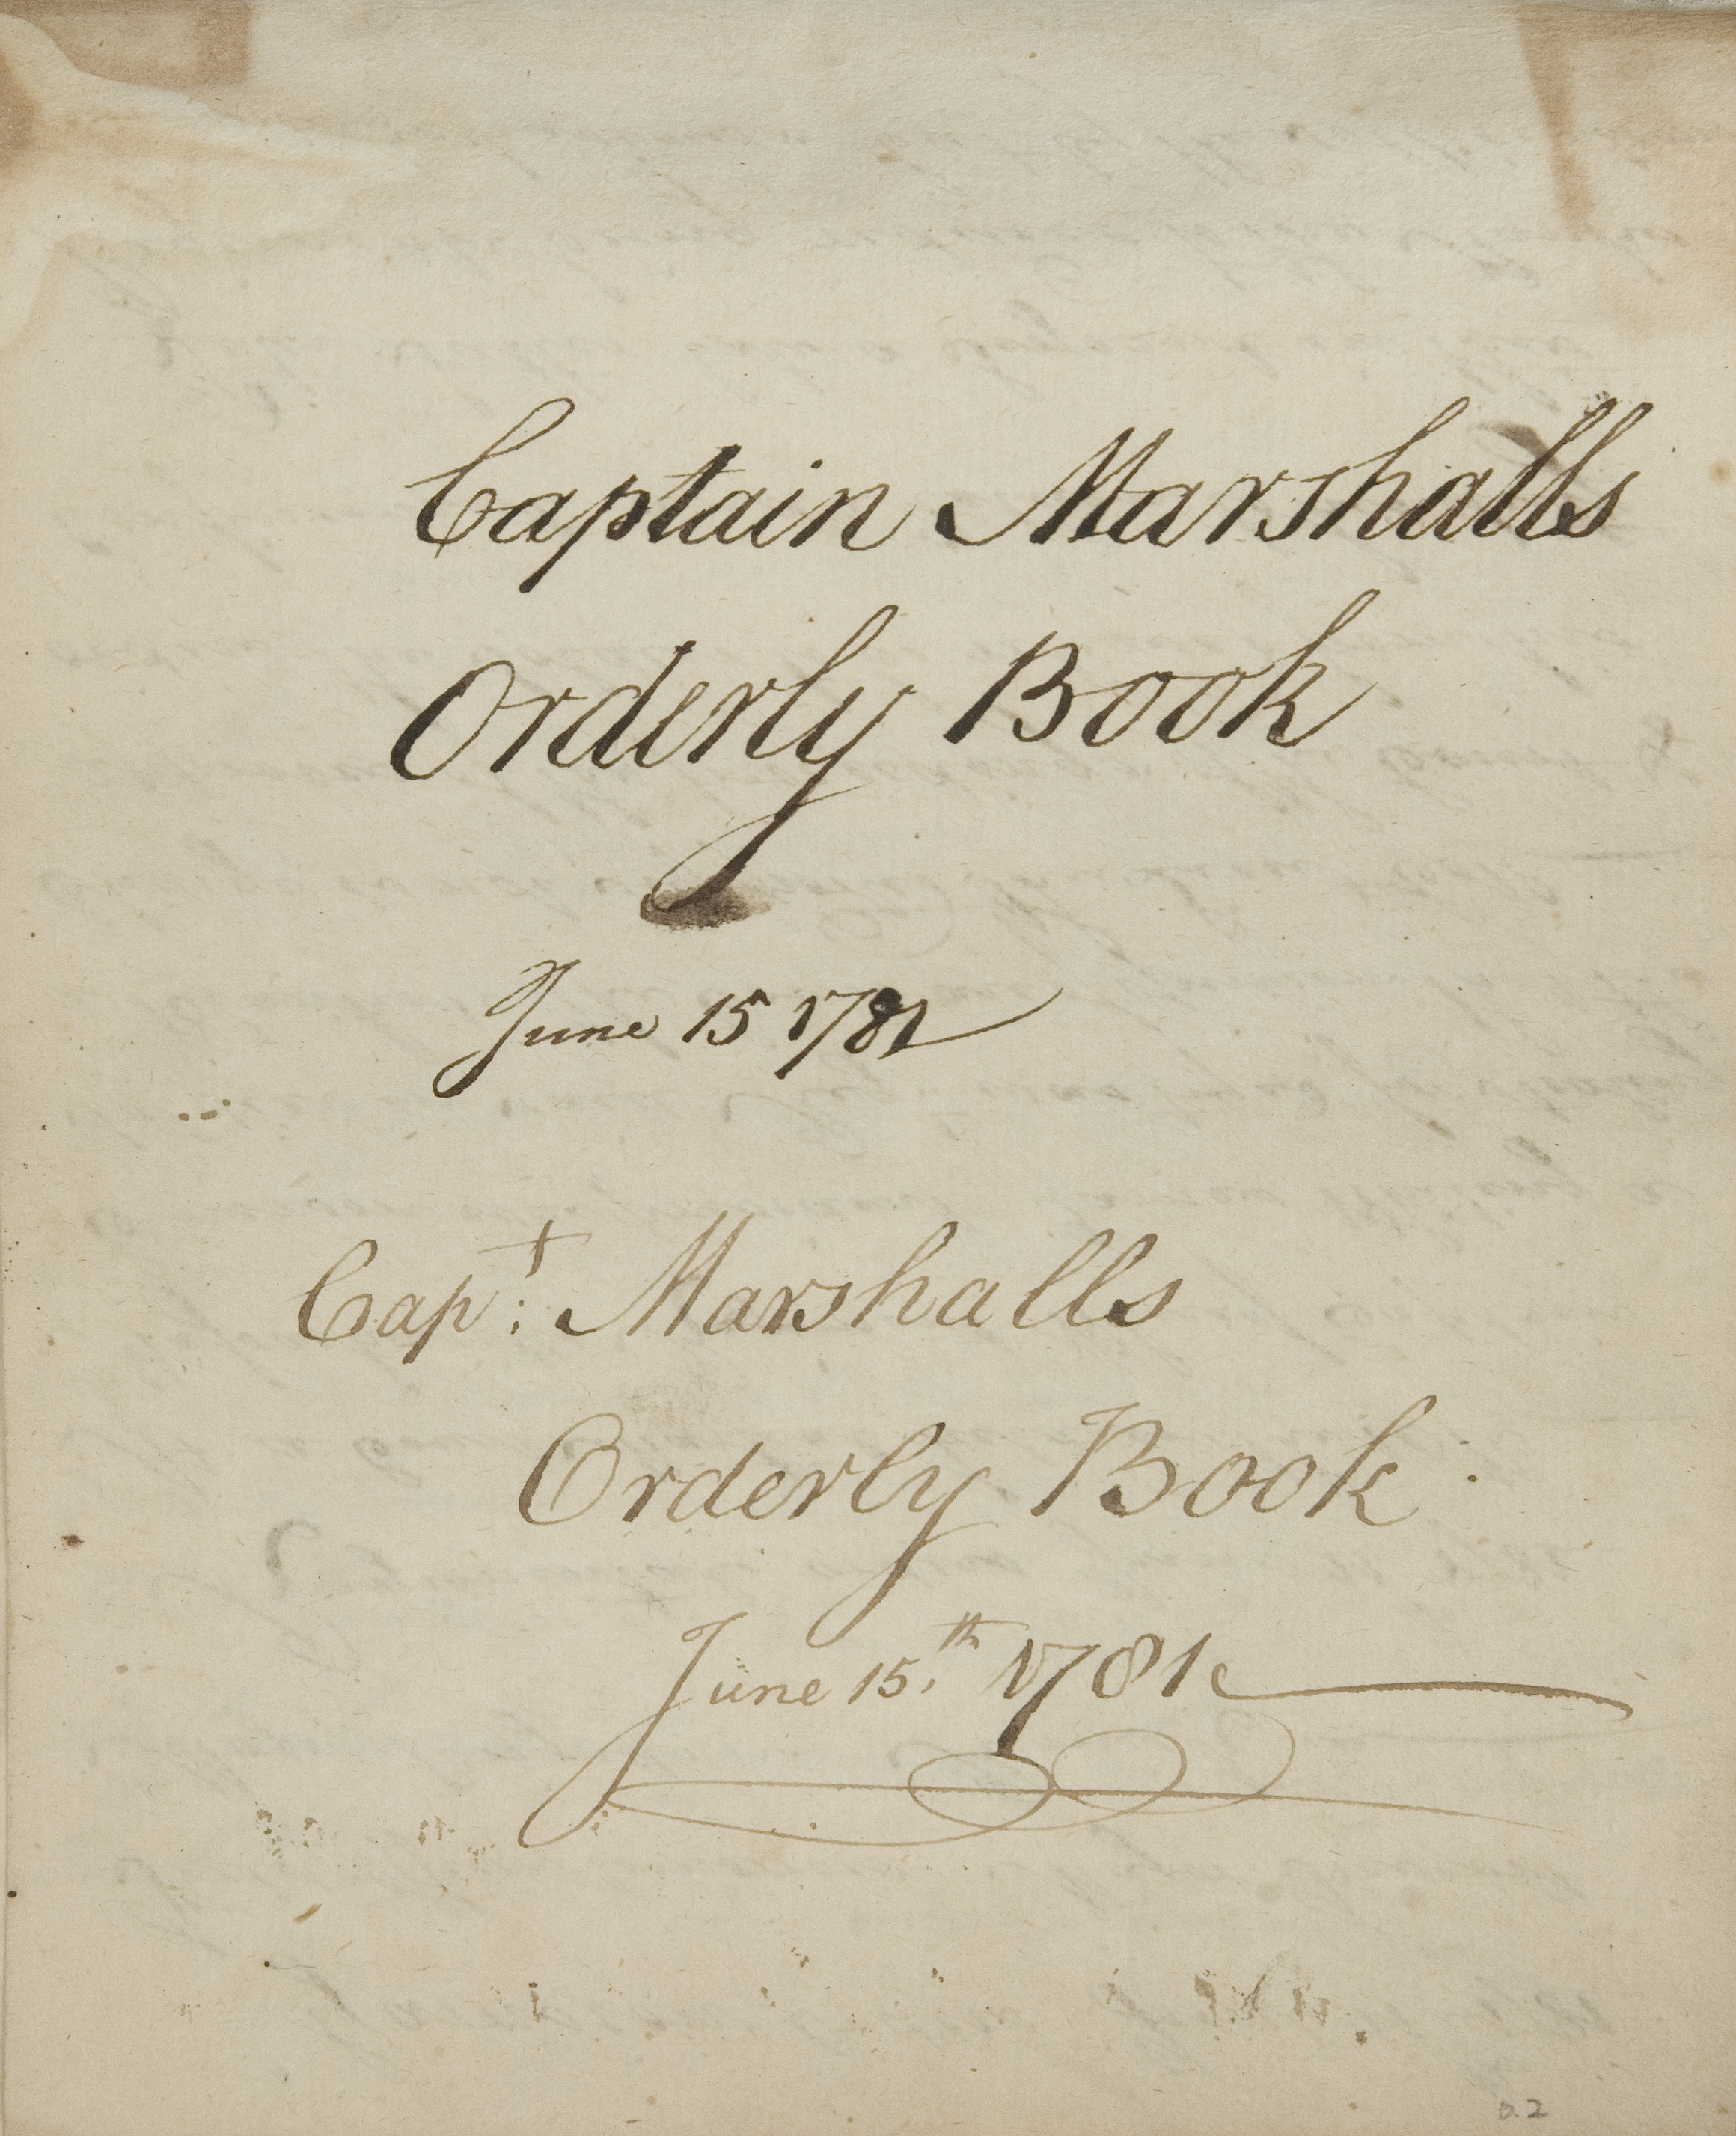 Orderly book of the Tenth Massachusetts Regiment kept by Christopher Marshall, West Point, Peekskill and New Windsor, N.Y., June 11-September 3, 1781